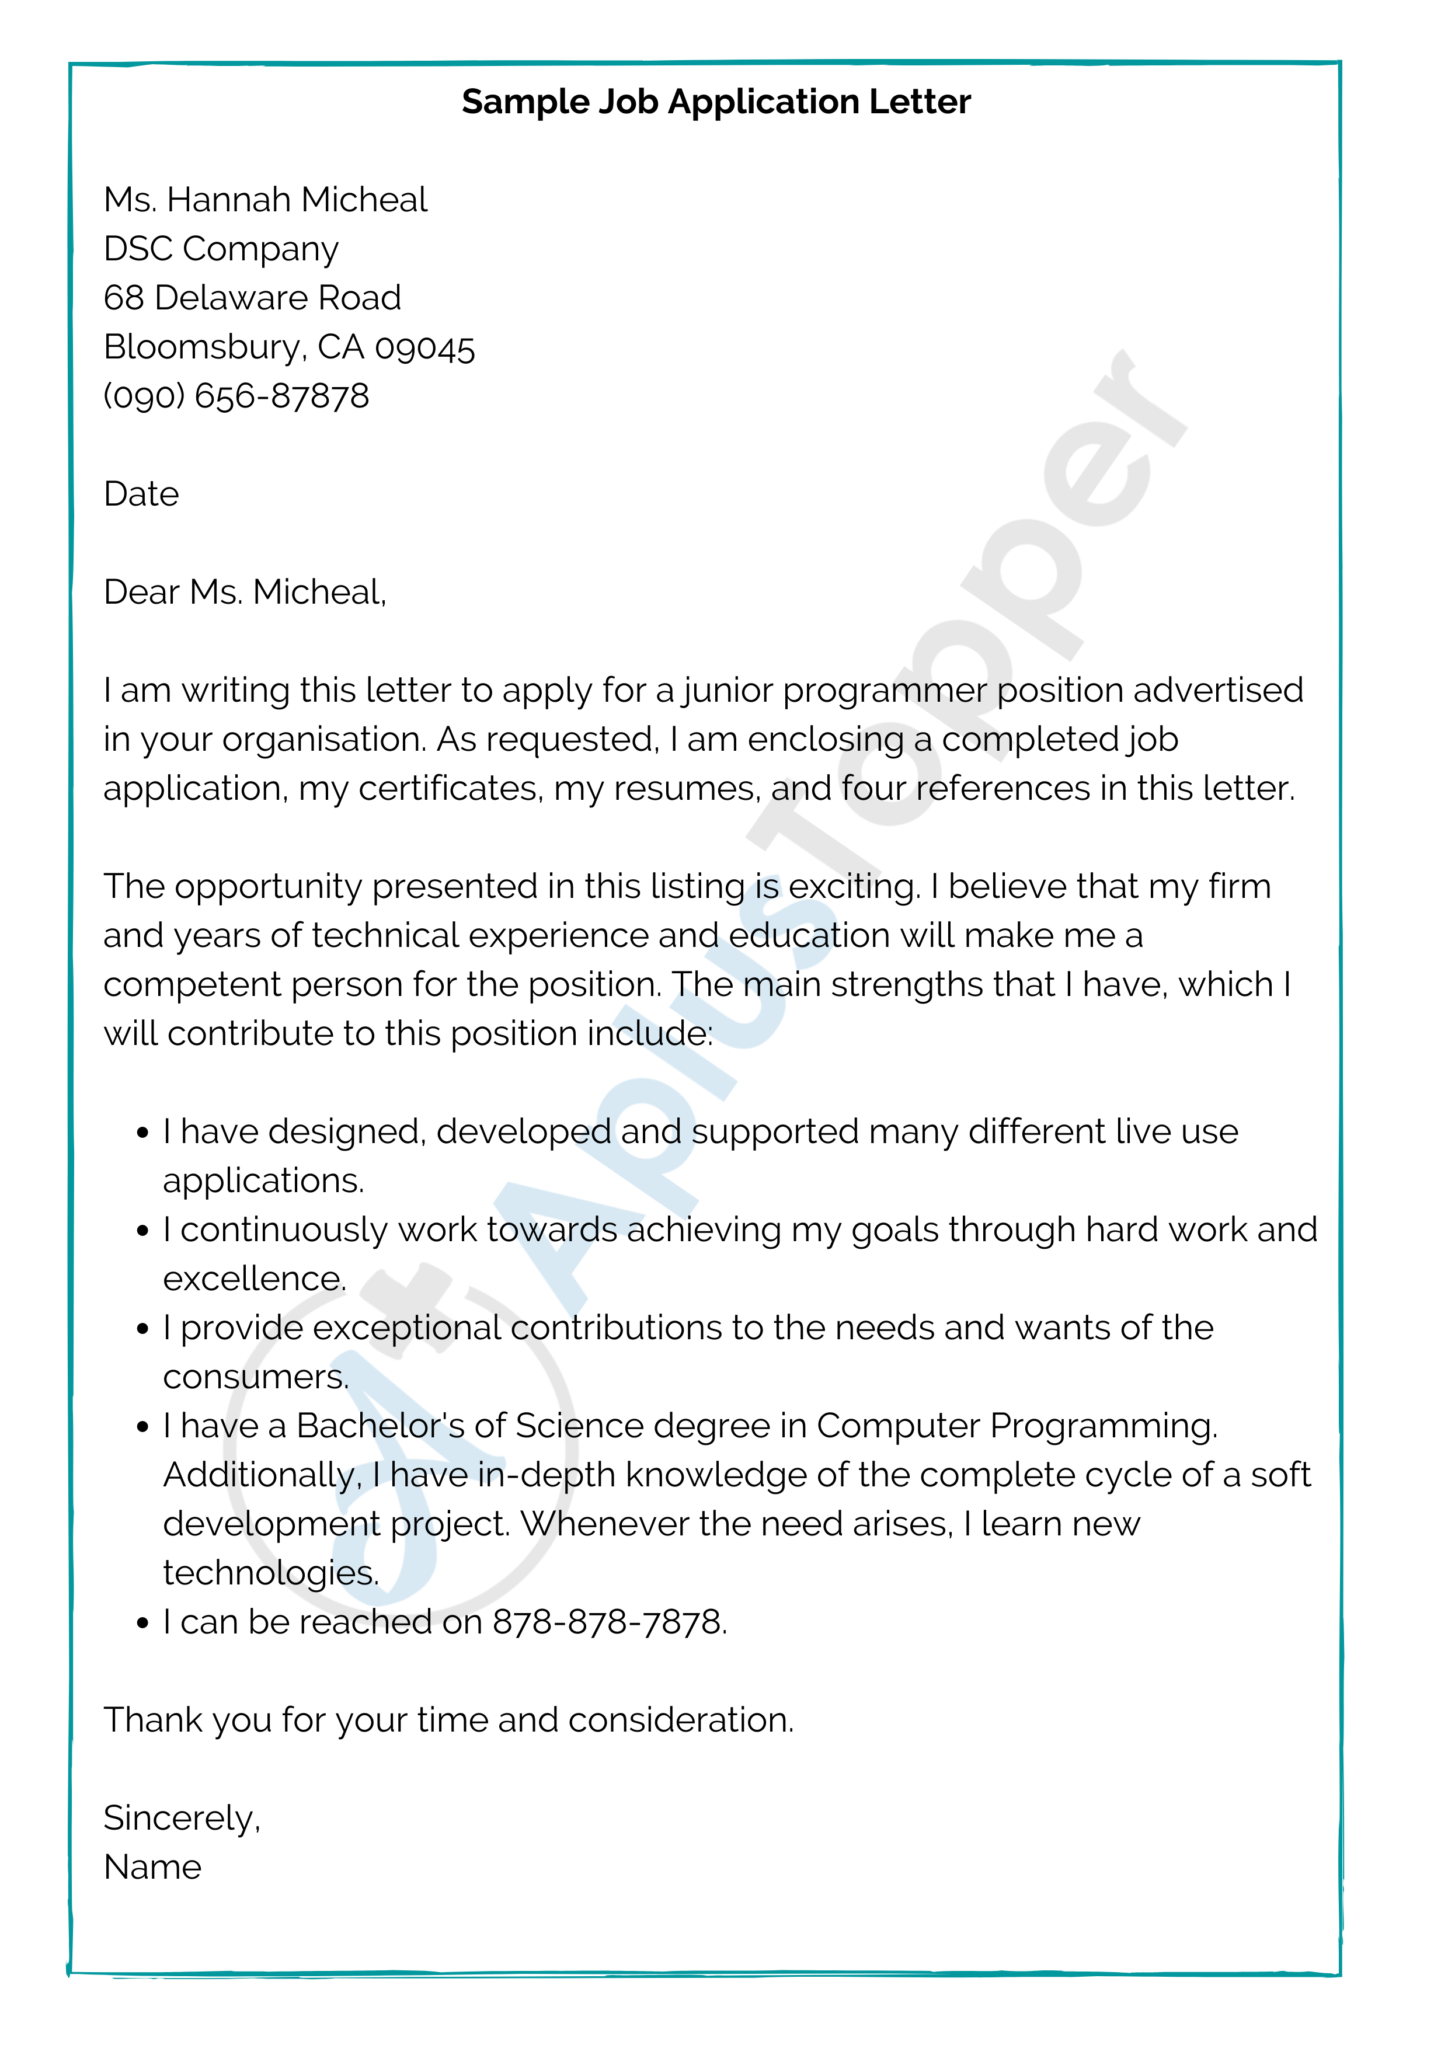 how to write an application letter heading